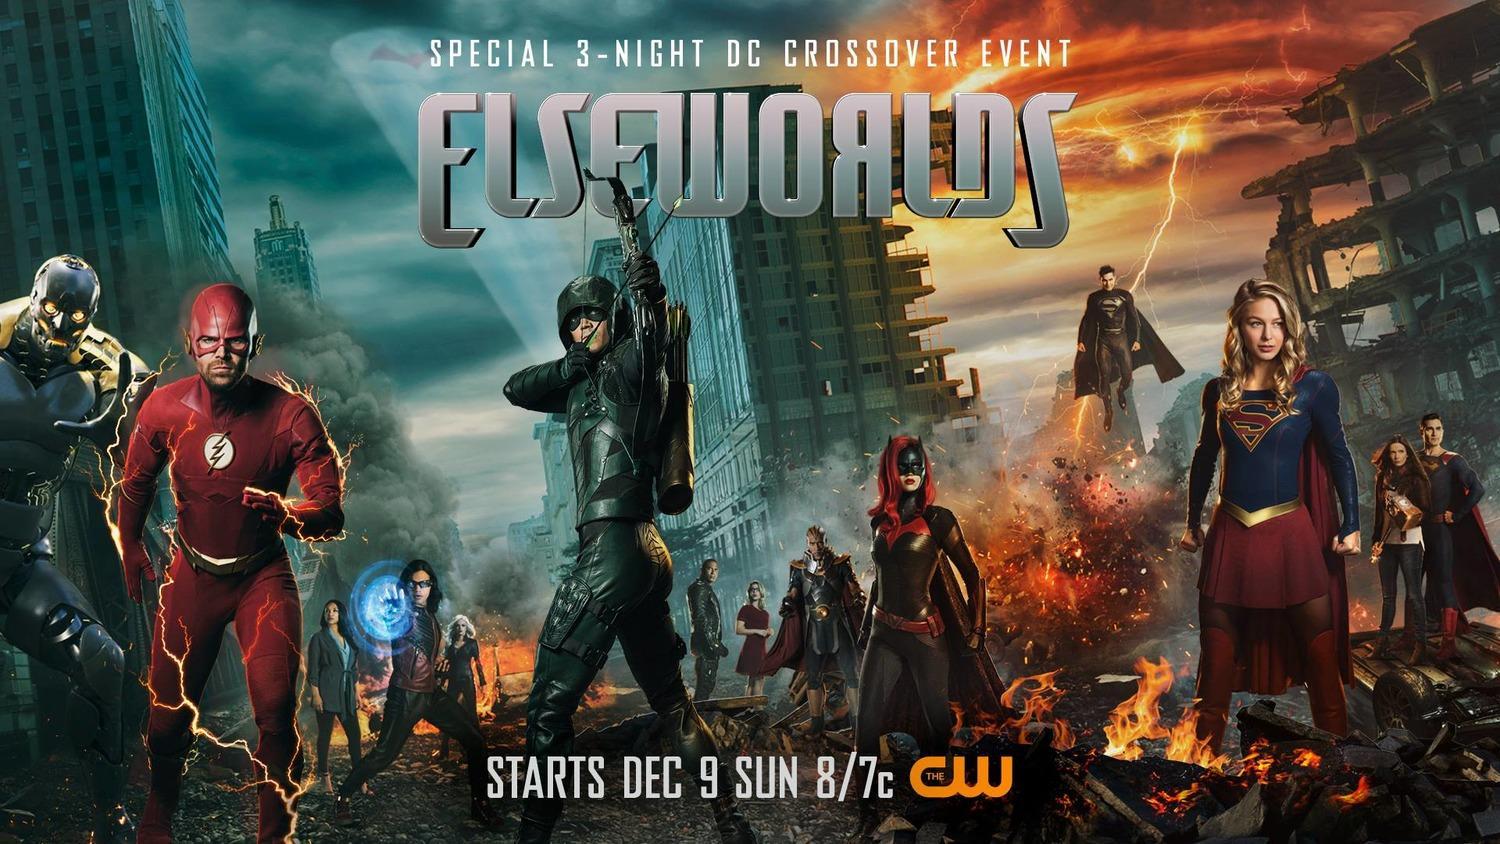 Elseworlds (TV) - Posters